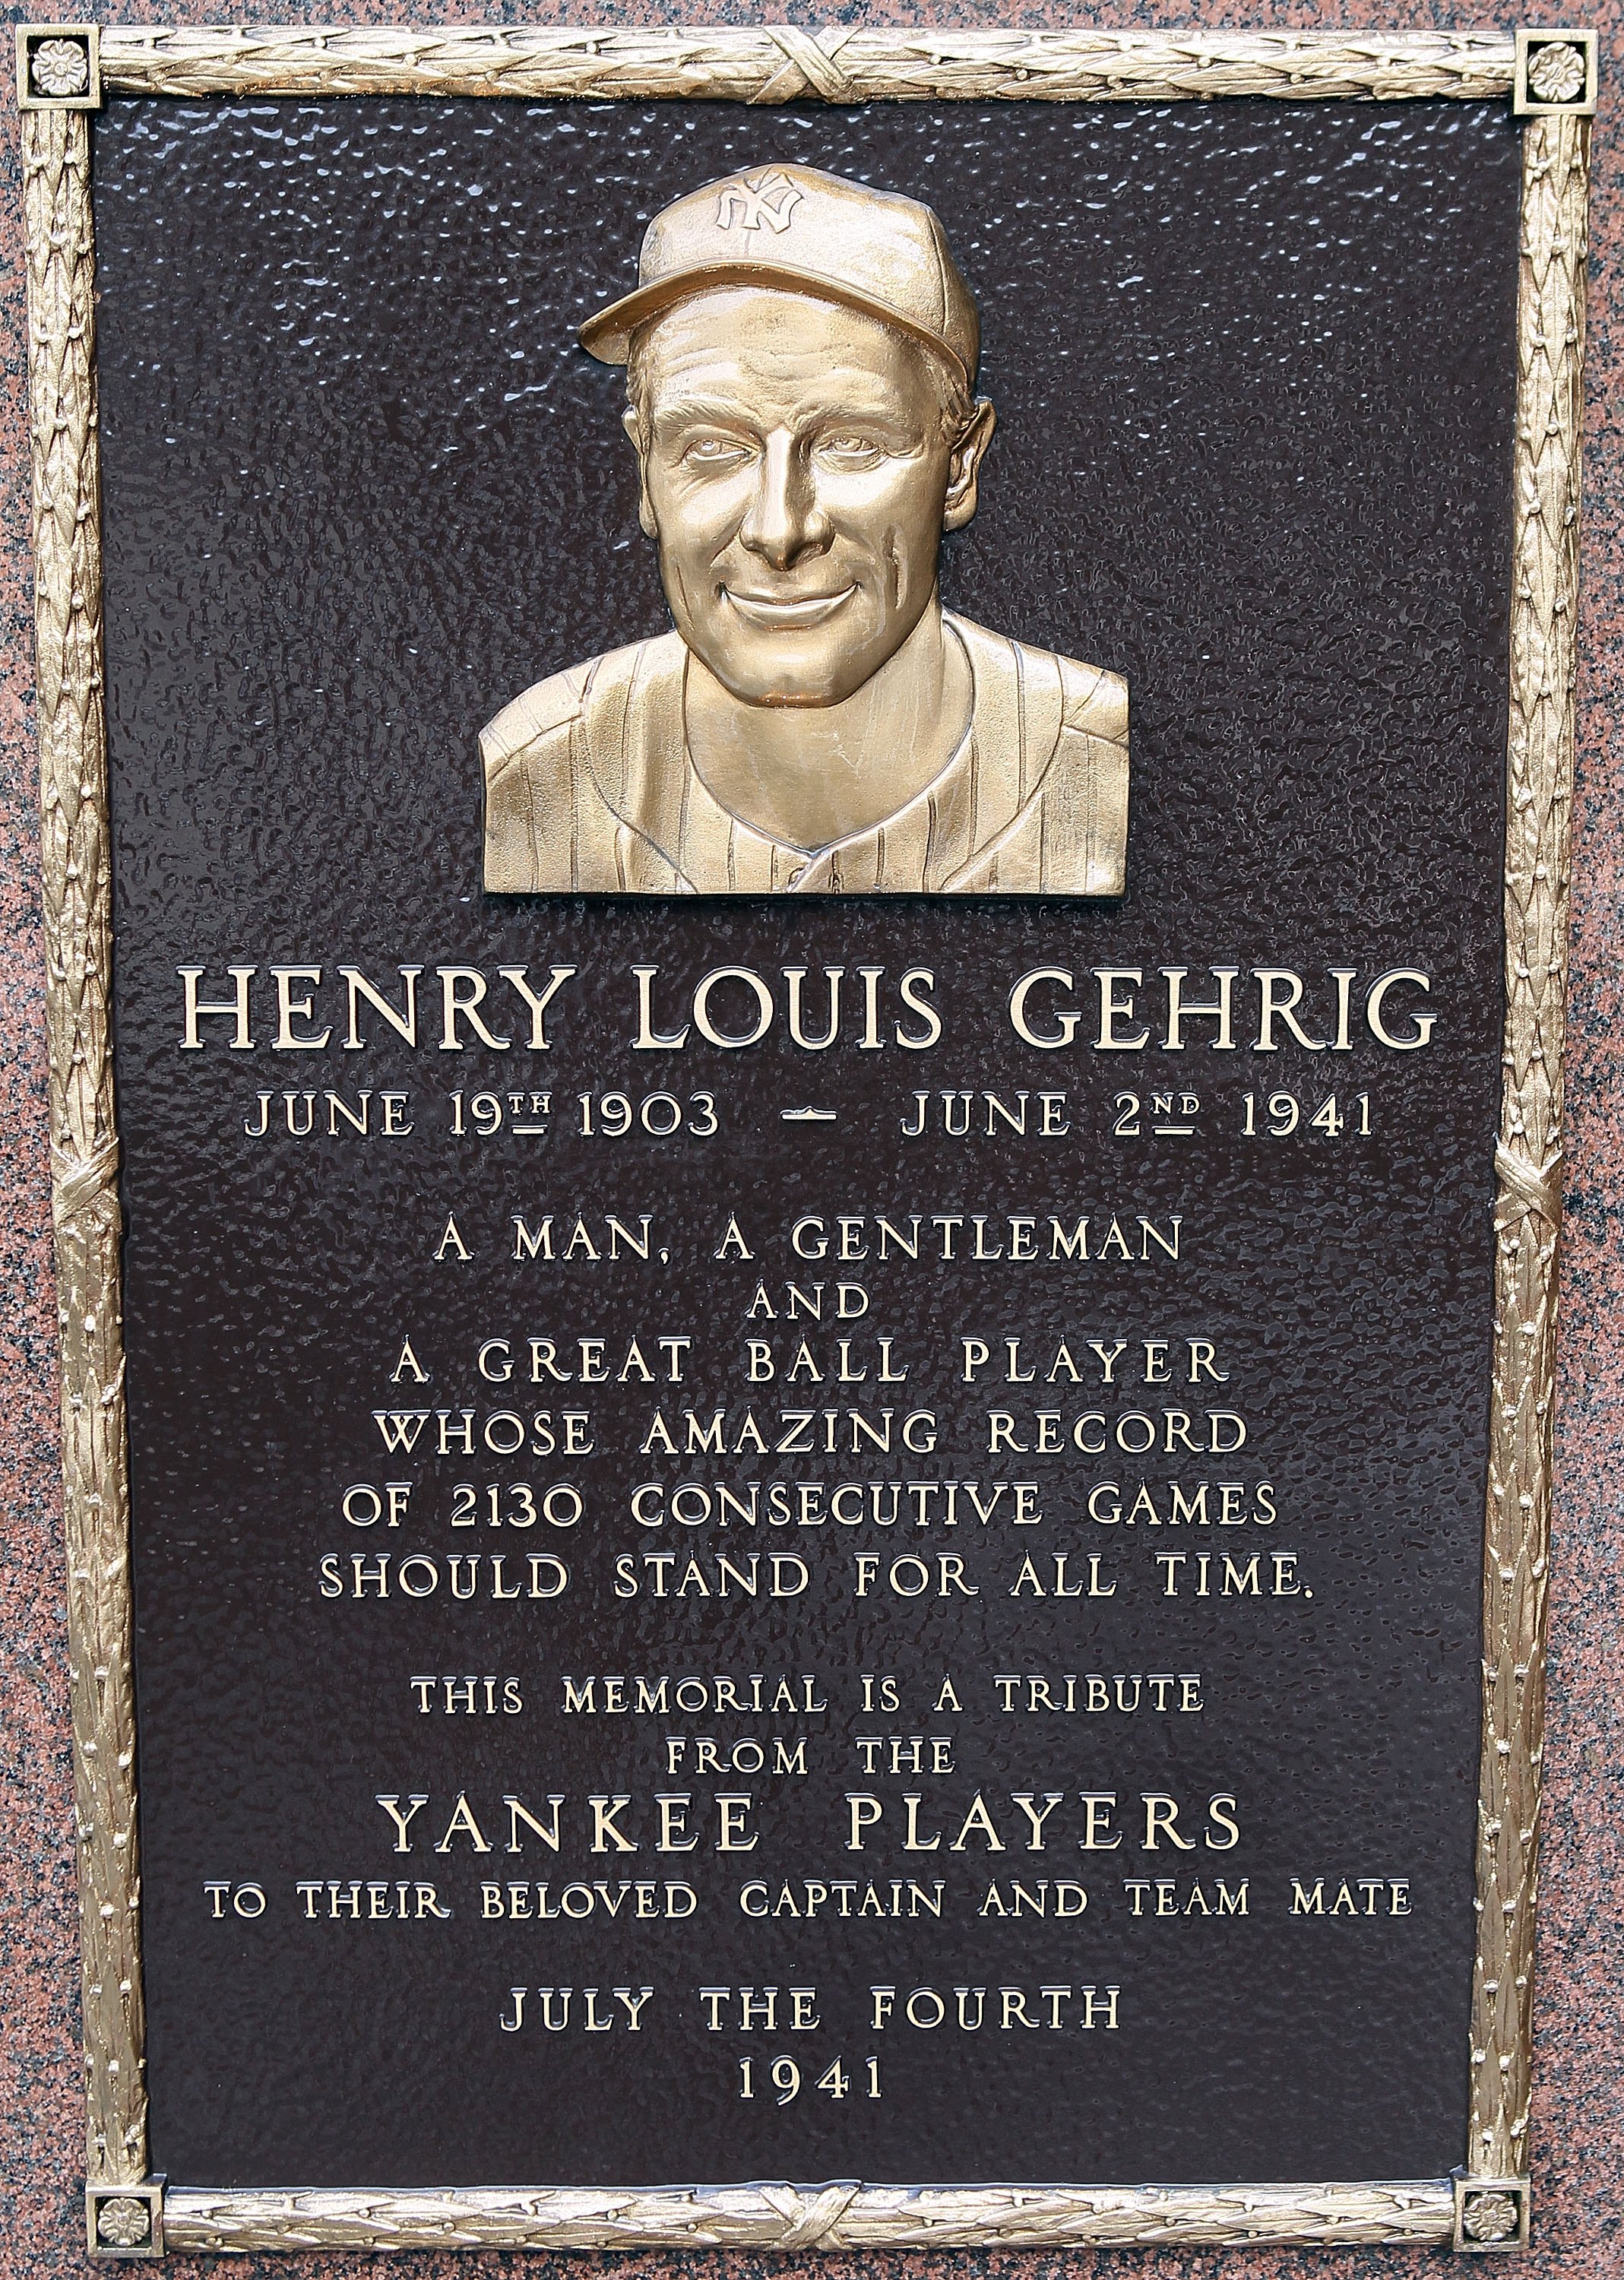 NEW YORK - MAY 02:  The plaque of Lou Gehrig is seen in Monument Park at Yankee Stadium prior to game between the New York Yankees and the Chicago White Sox on May 2, 2010 in the Bronx borough of New York City. The Yankees defeated the White Sox 12-3.  (P